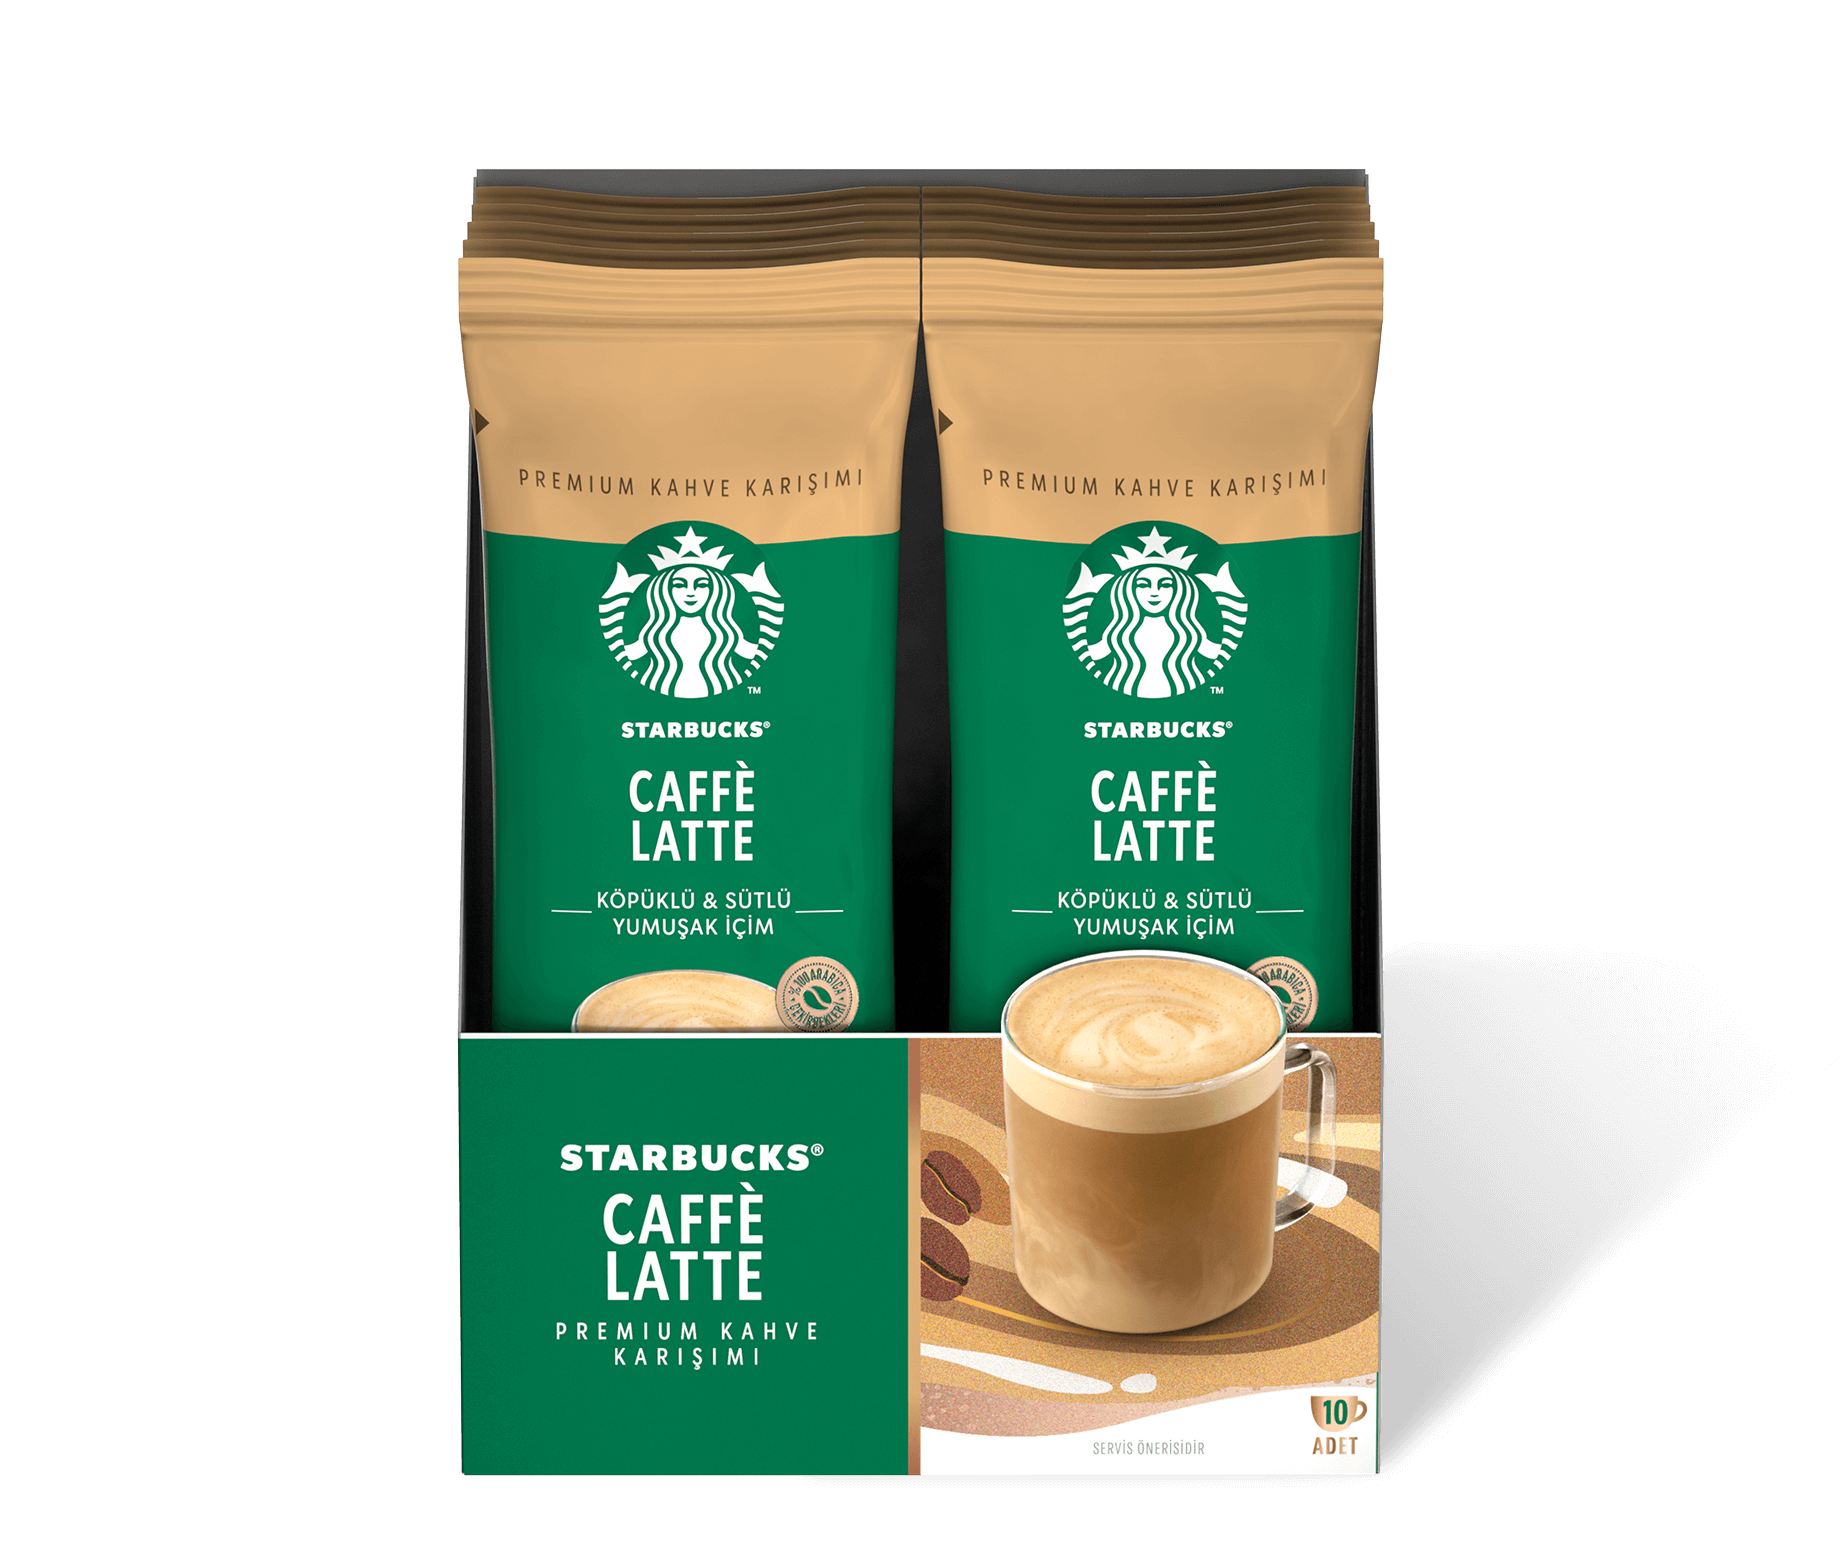 Buy Starbucks By Dolce Gusto Coffee Pods Caffe Latte online at